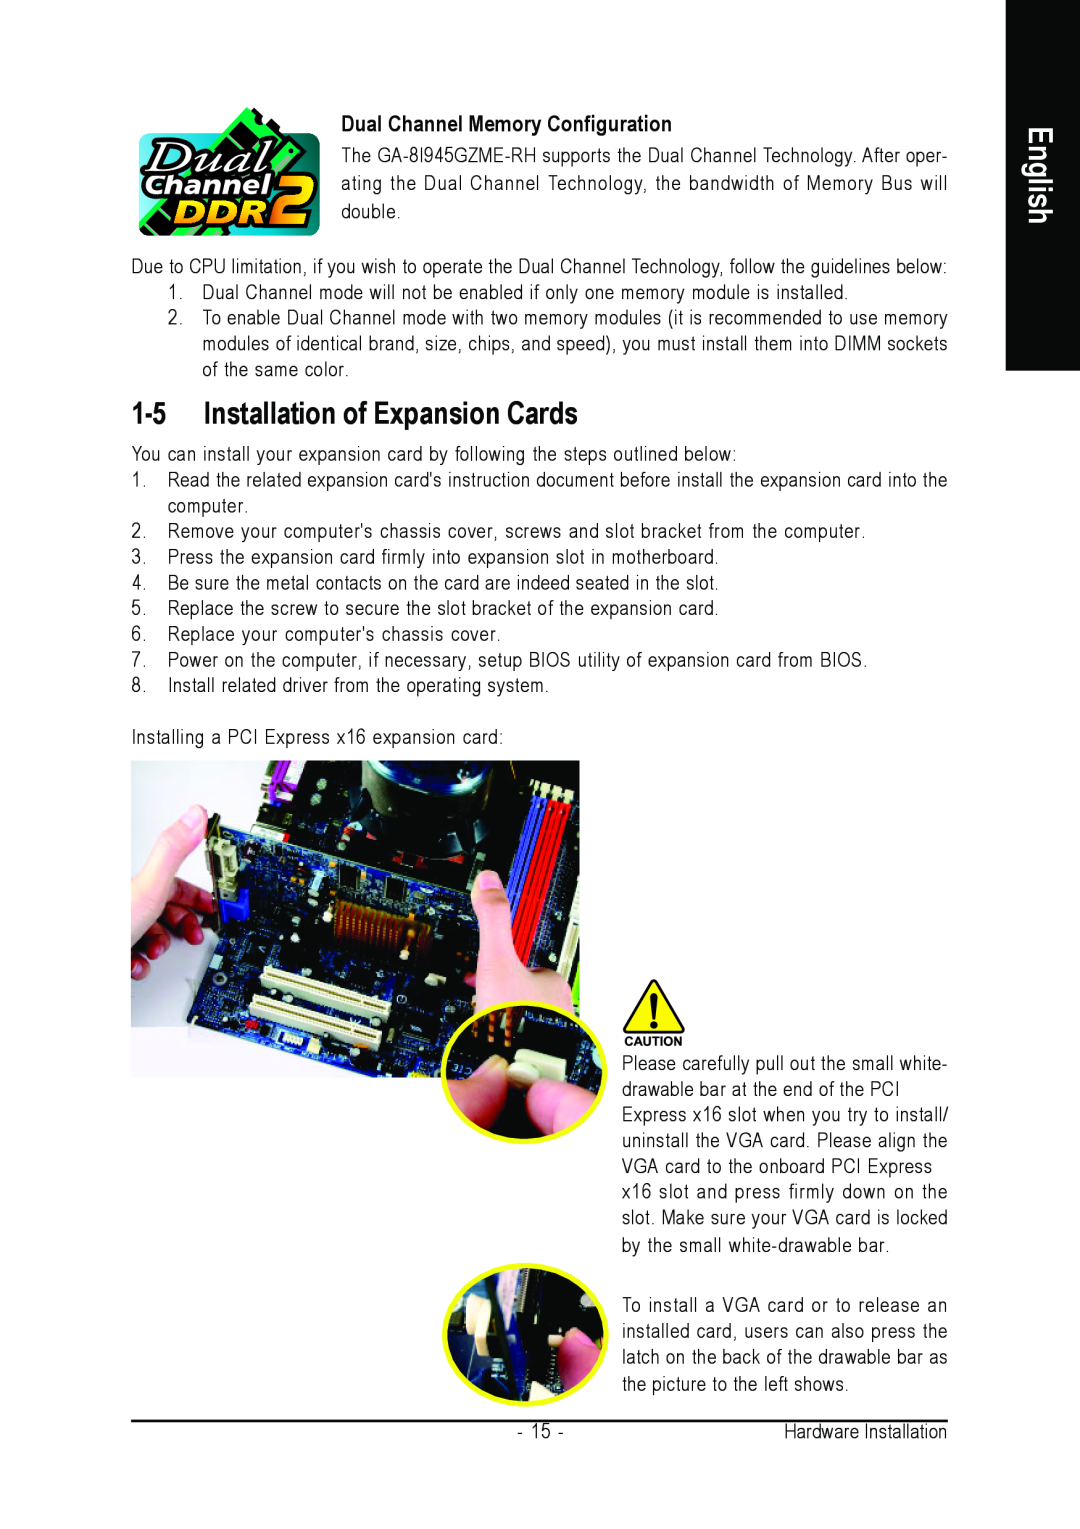 Intel GA-8I945GZME-RH user manual Installation of Expansion Cards, Dual Channel Memory Configuration, English 